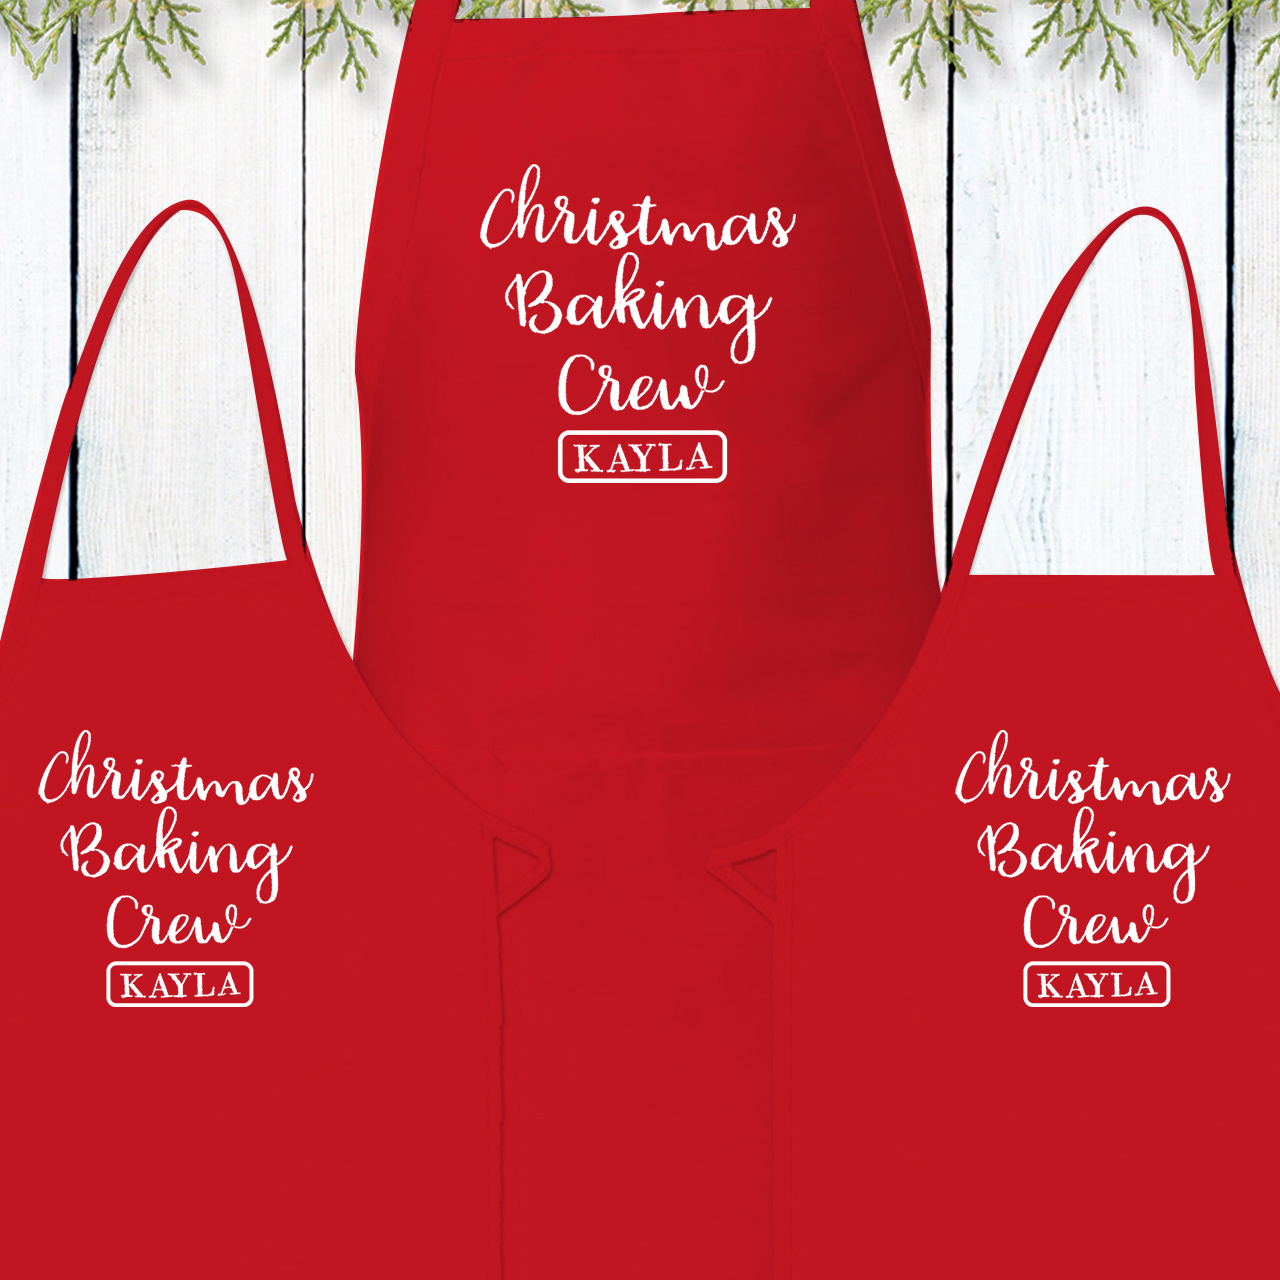 Christmas Baking Crew Personalized Apron Sets For Adult&Kids